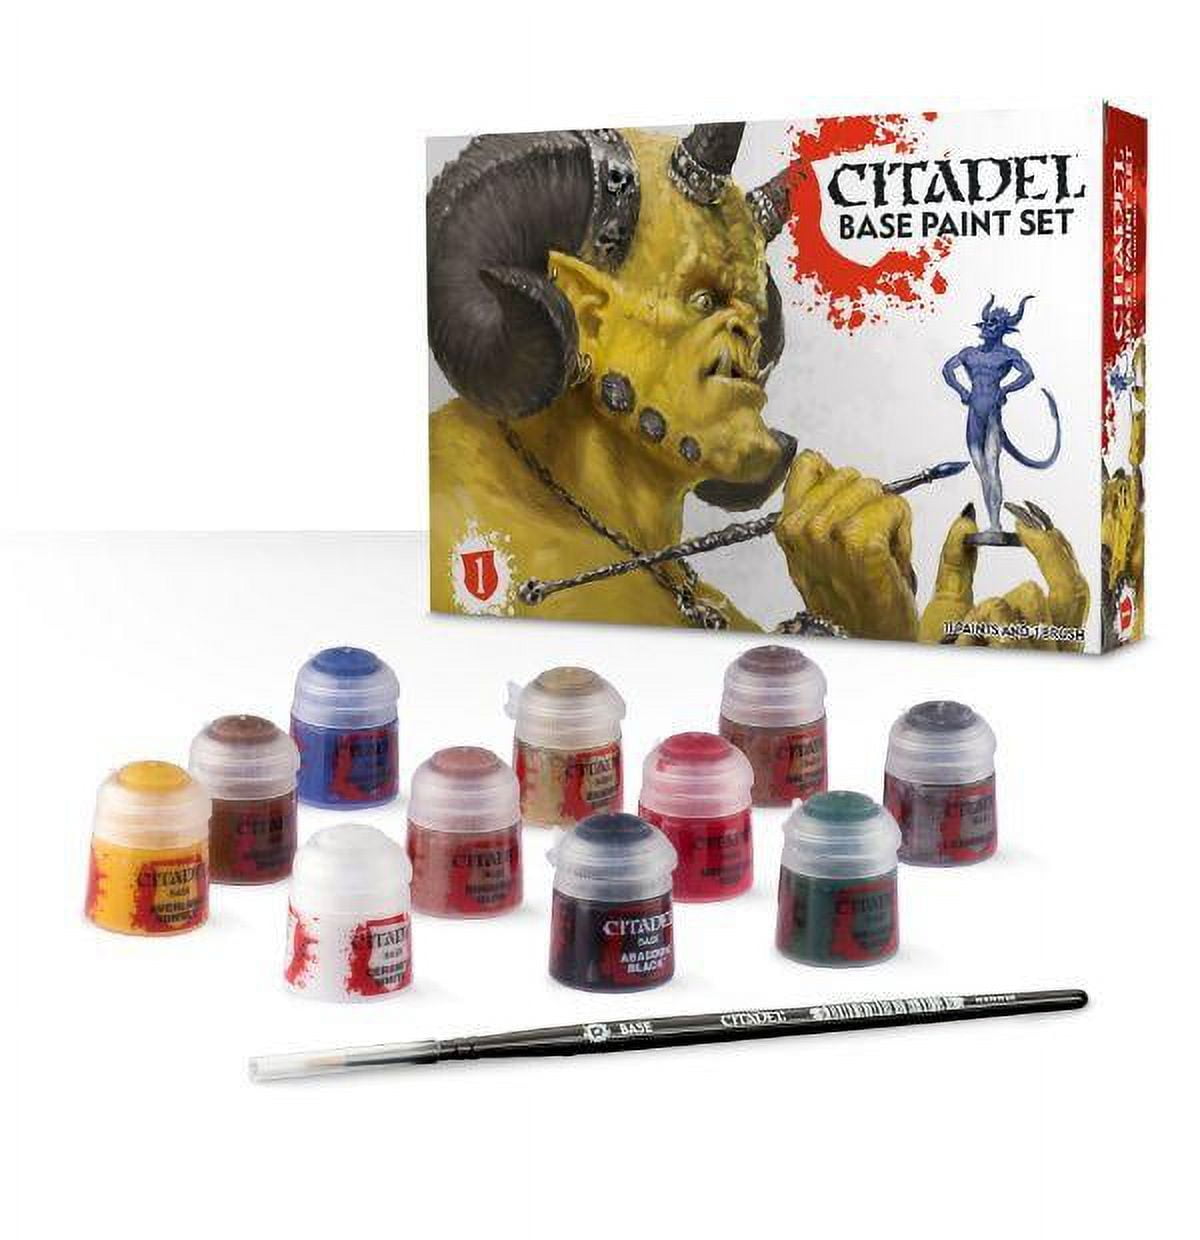 Where can I go to buy a complete set of Citadel Paint? : r